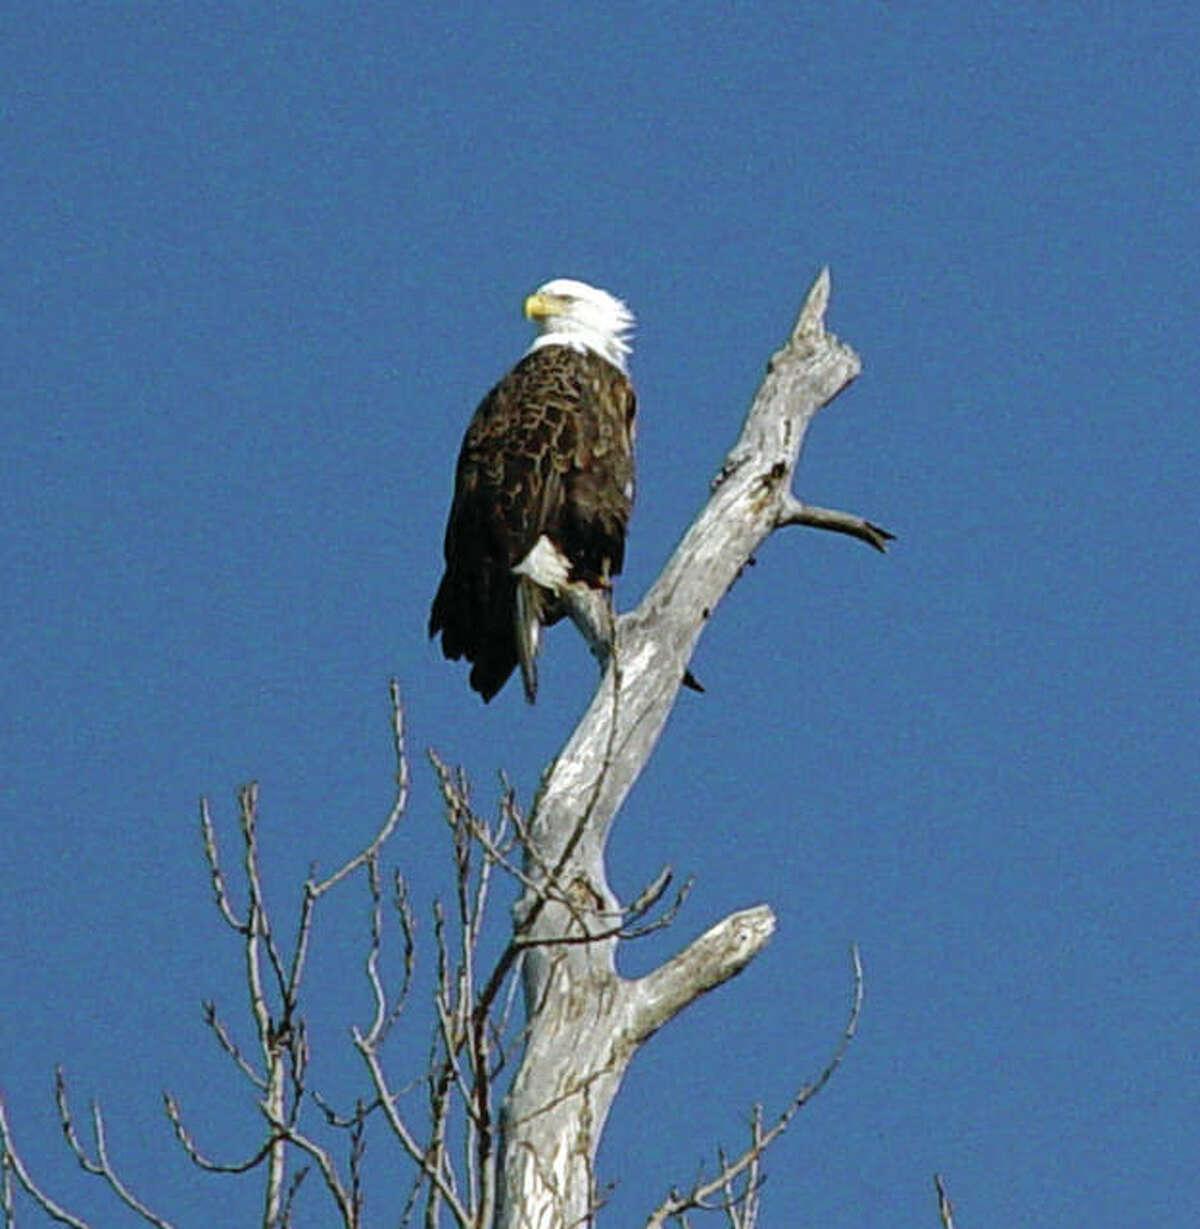 A lone eagle at the tip-top of a tree, just across the river in the Missouri wetlands.